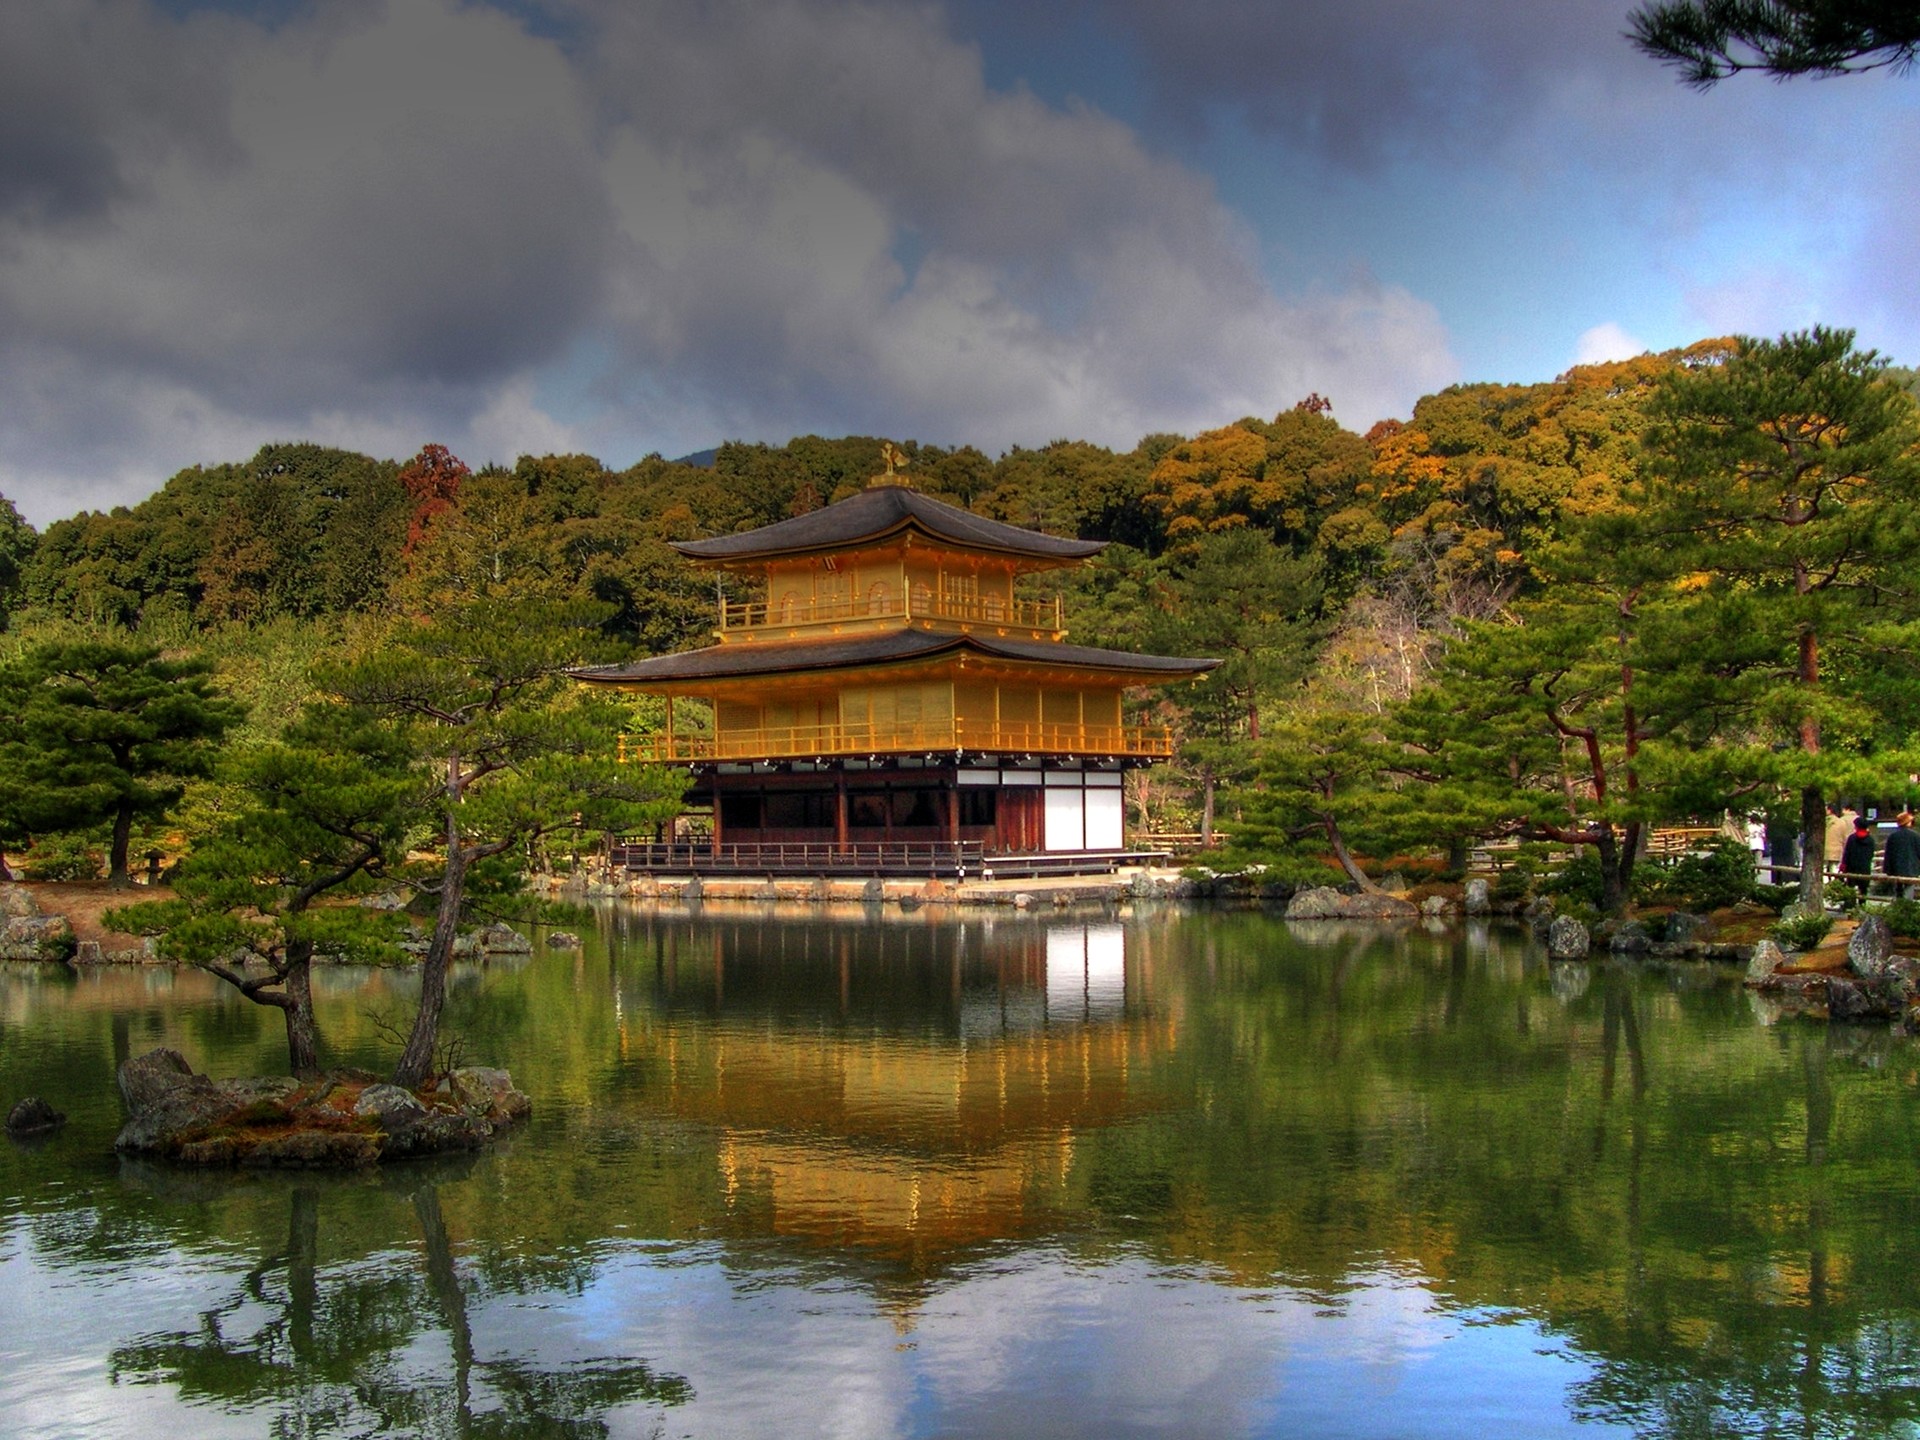 JAPAN LANDSCAPE – Free Photo Pictures and Images